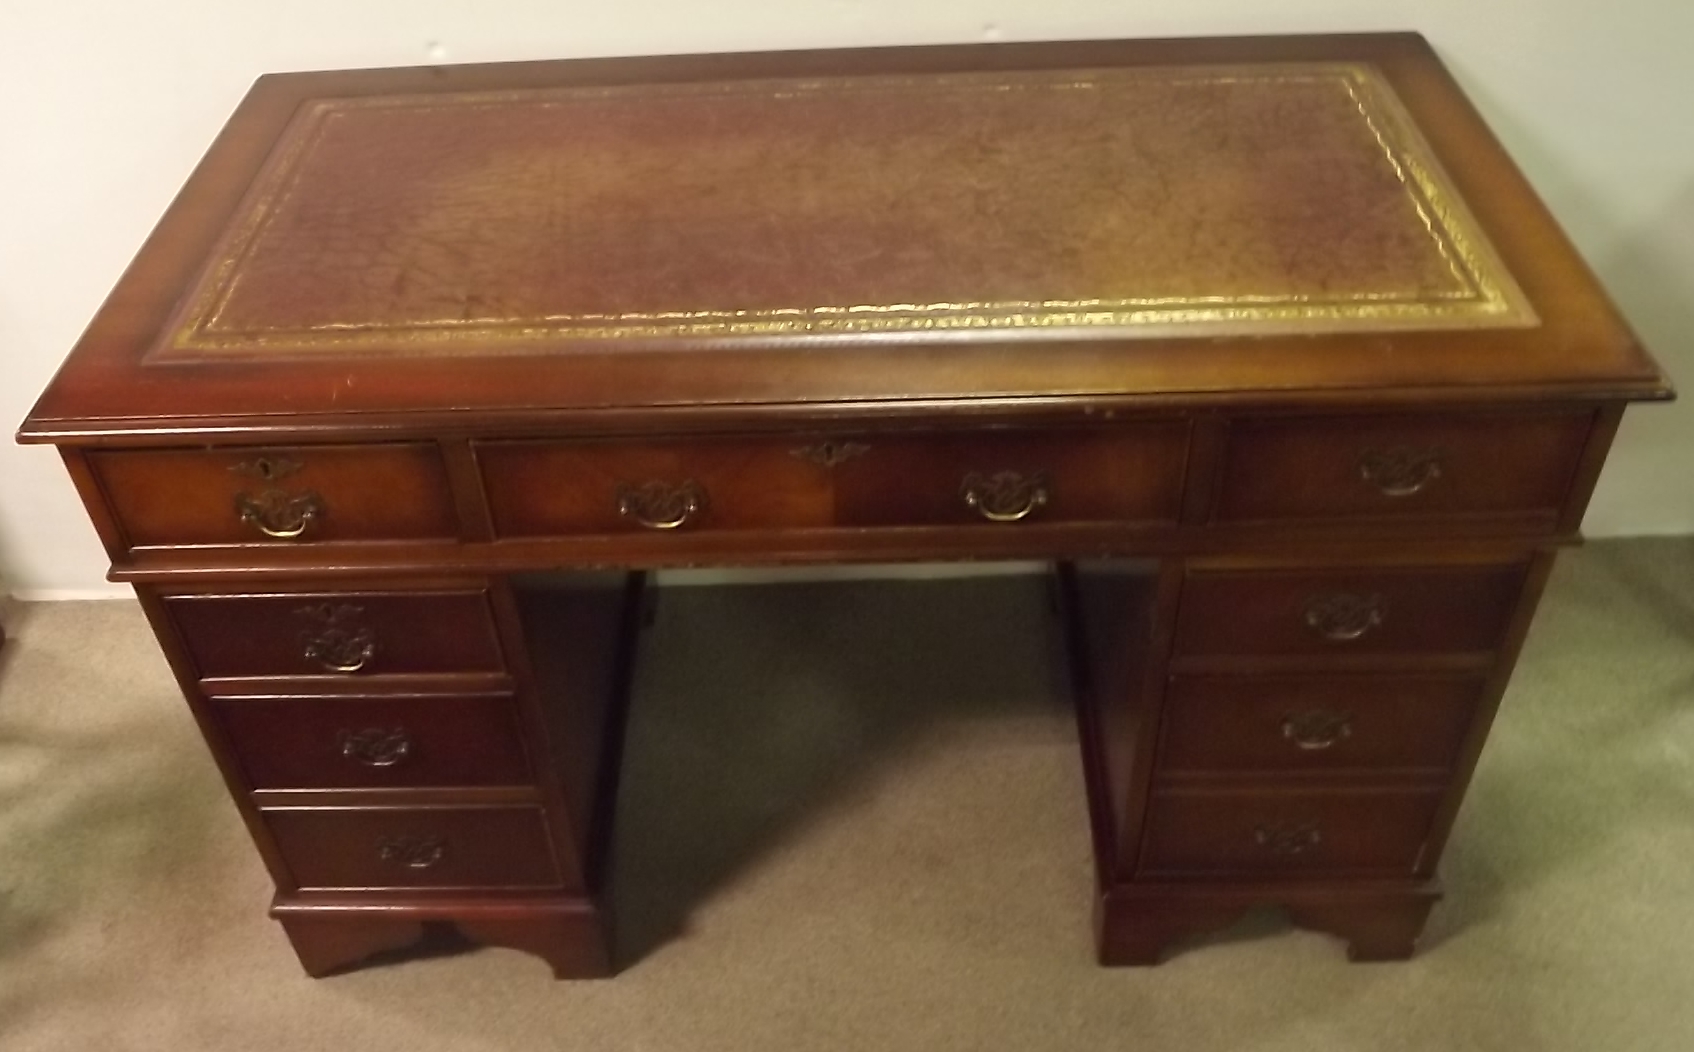 Mahogany Twin Pedestal Leather Top Desk - Image 2 of 2